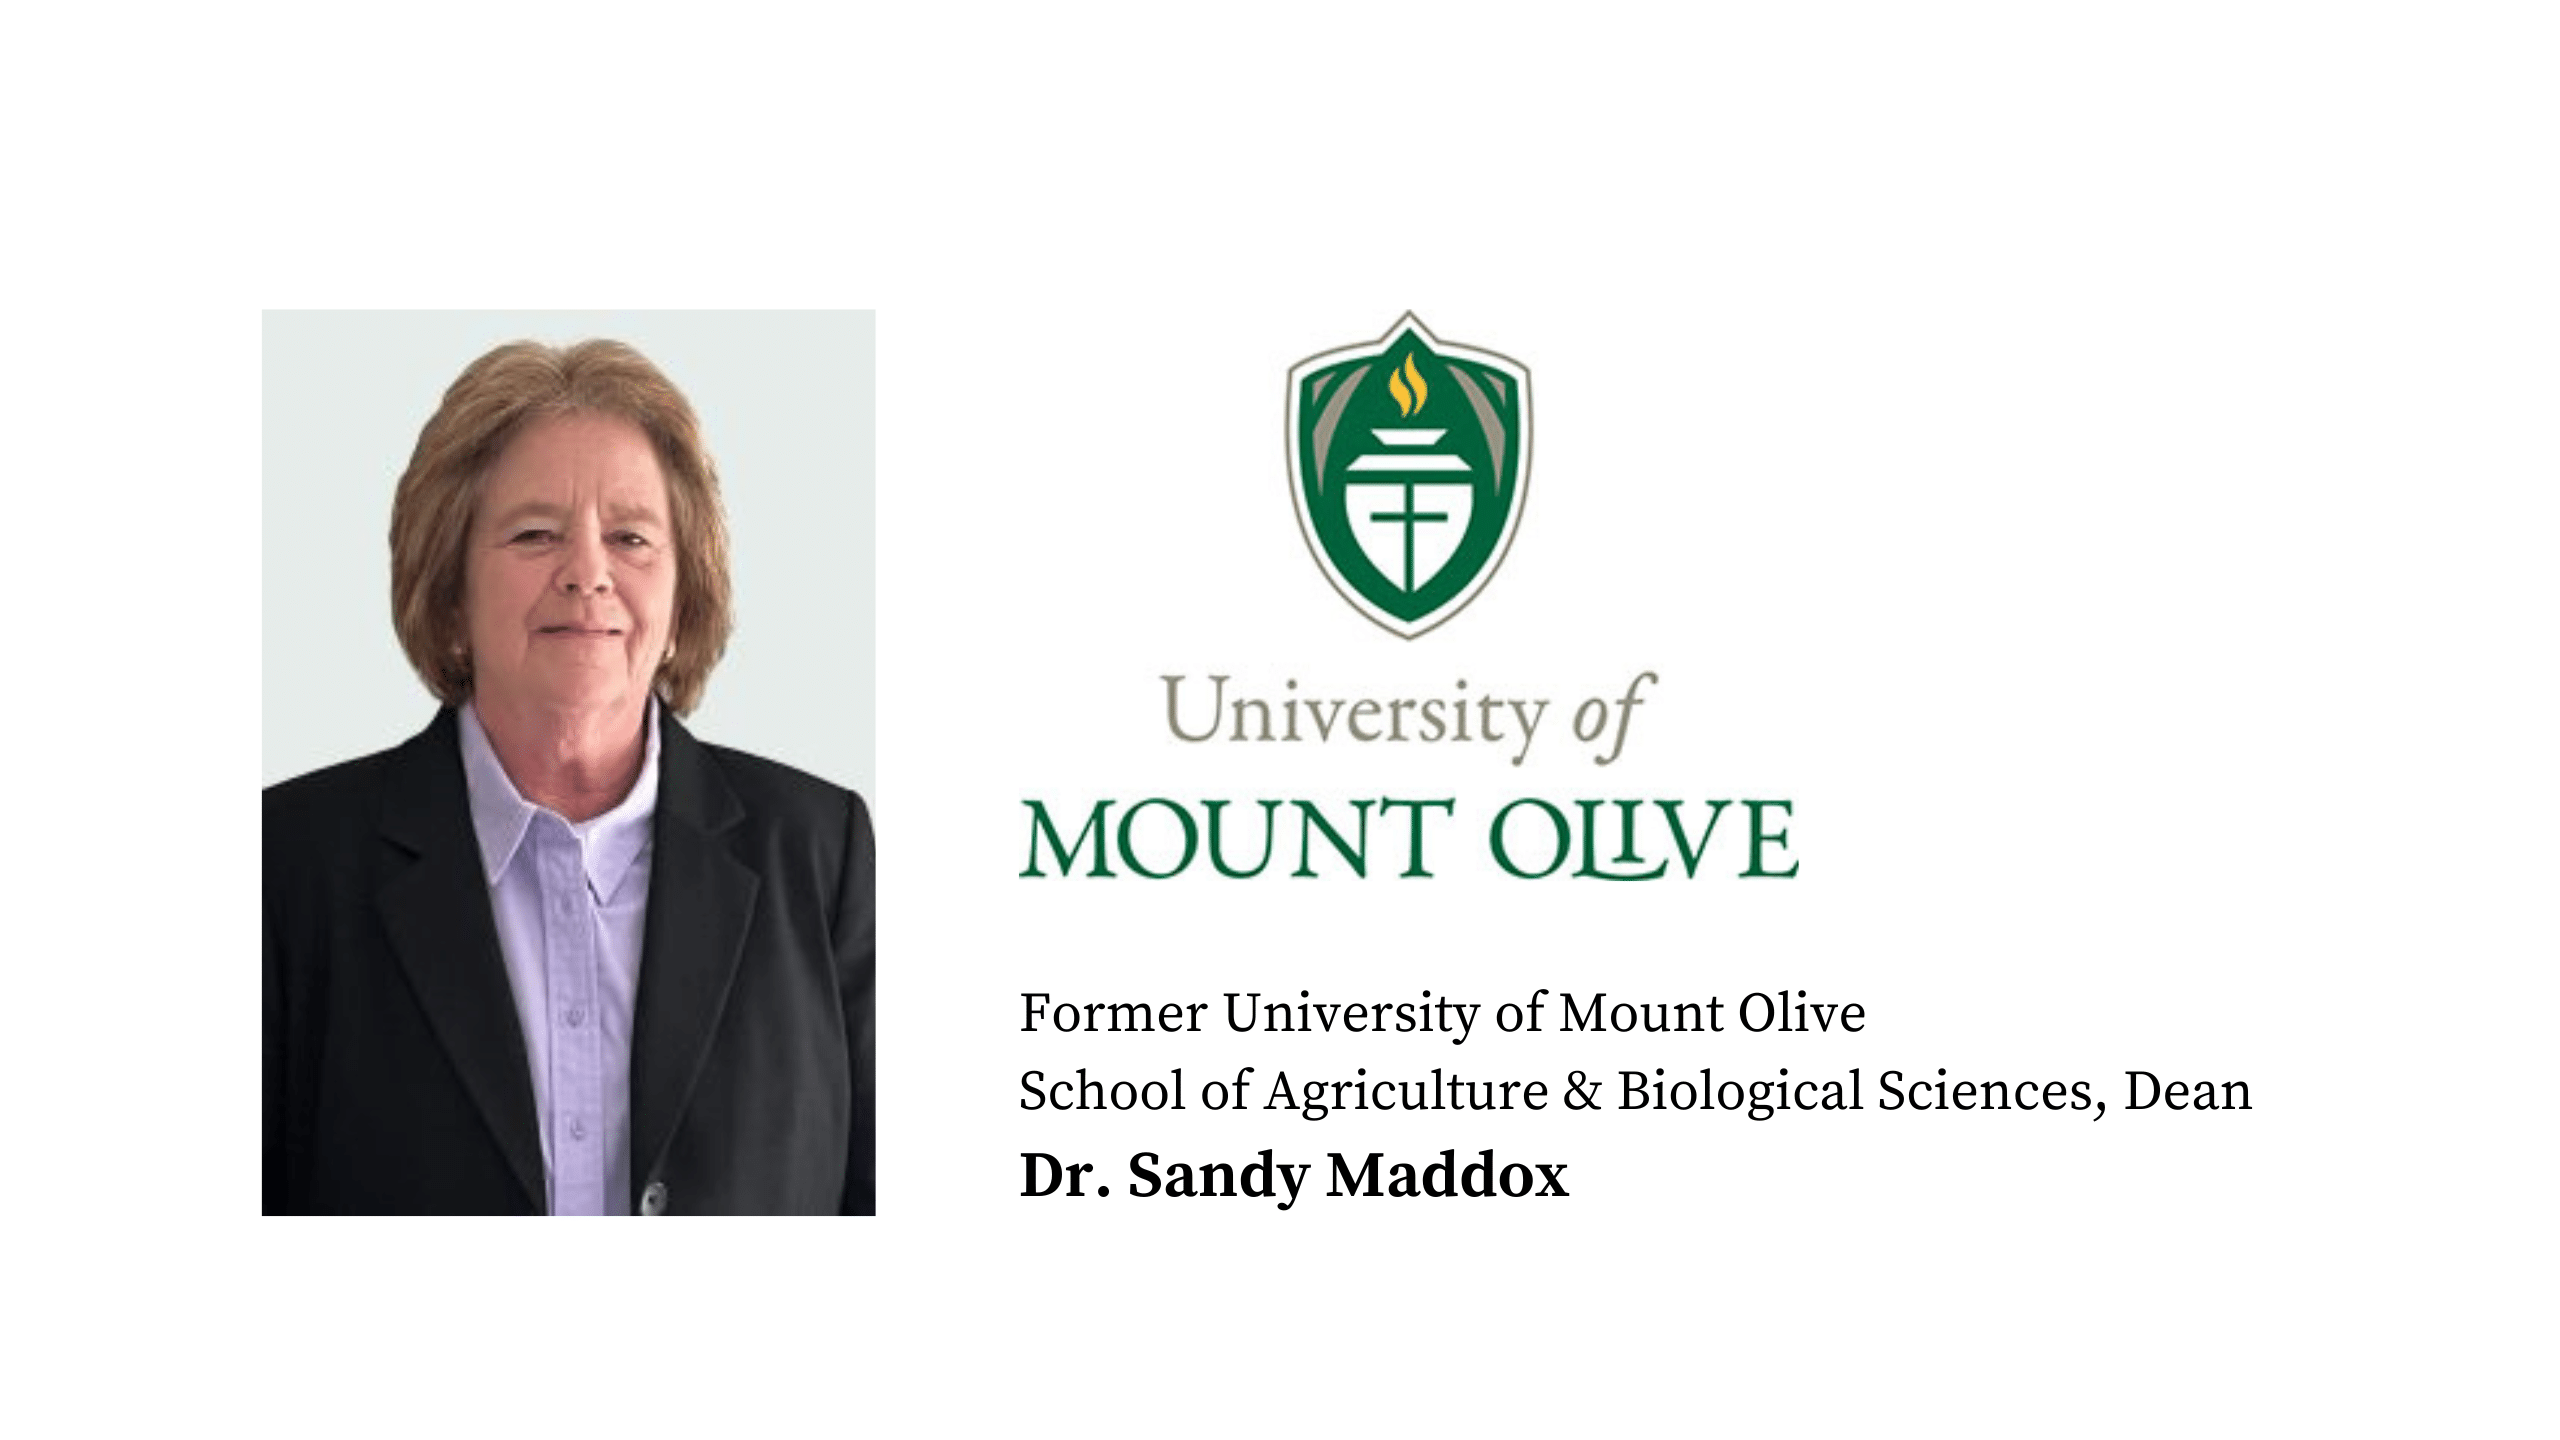 Celebrating the legacy of Dr. Sandy Maddox, retiring Dean of the School of Agriculture and Biological Sciences at the University of Mount Olive